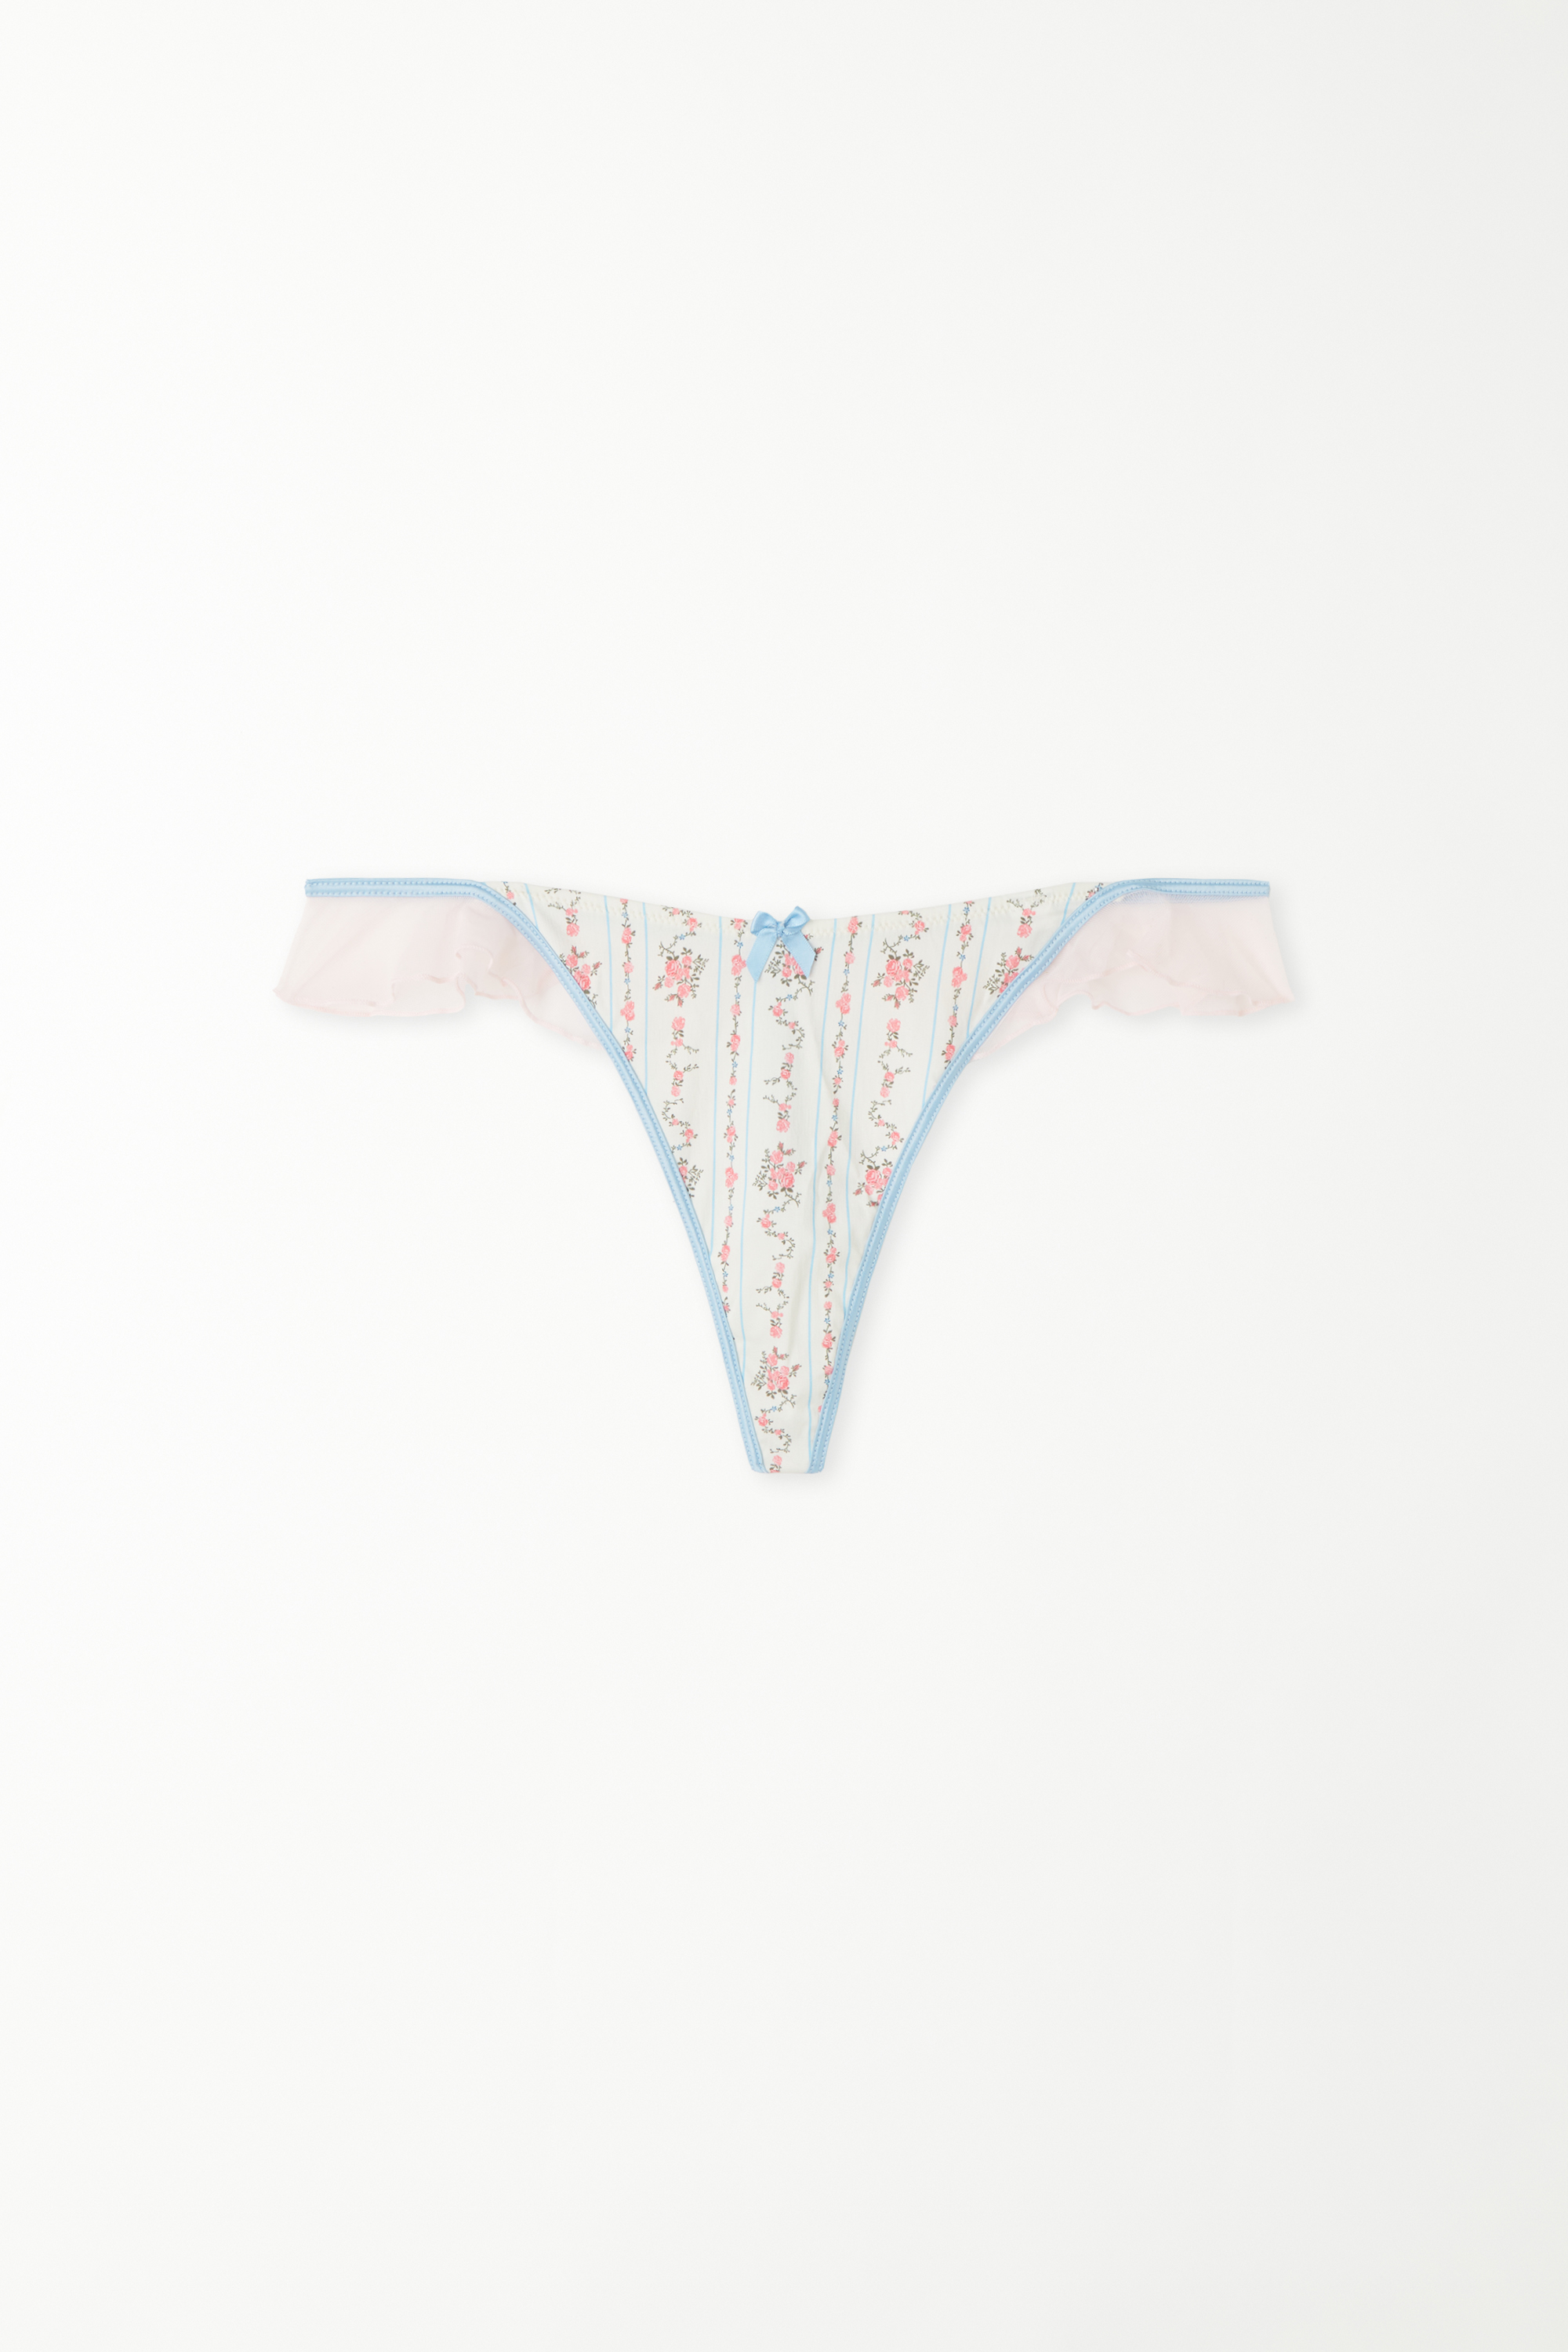 Dreaming Flowers High-Cut G-String with Thin Tanga-Style Panel